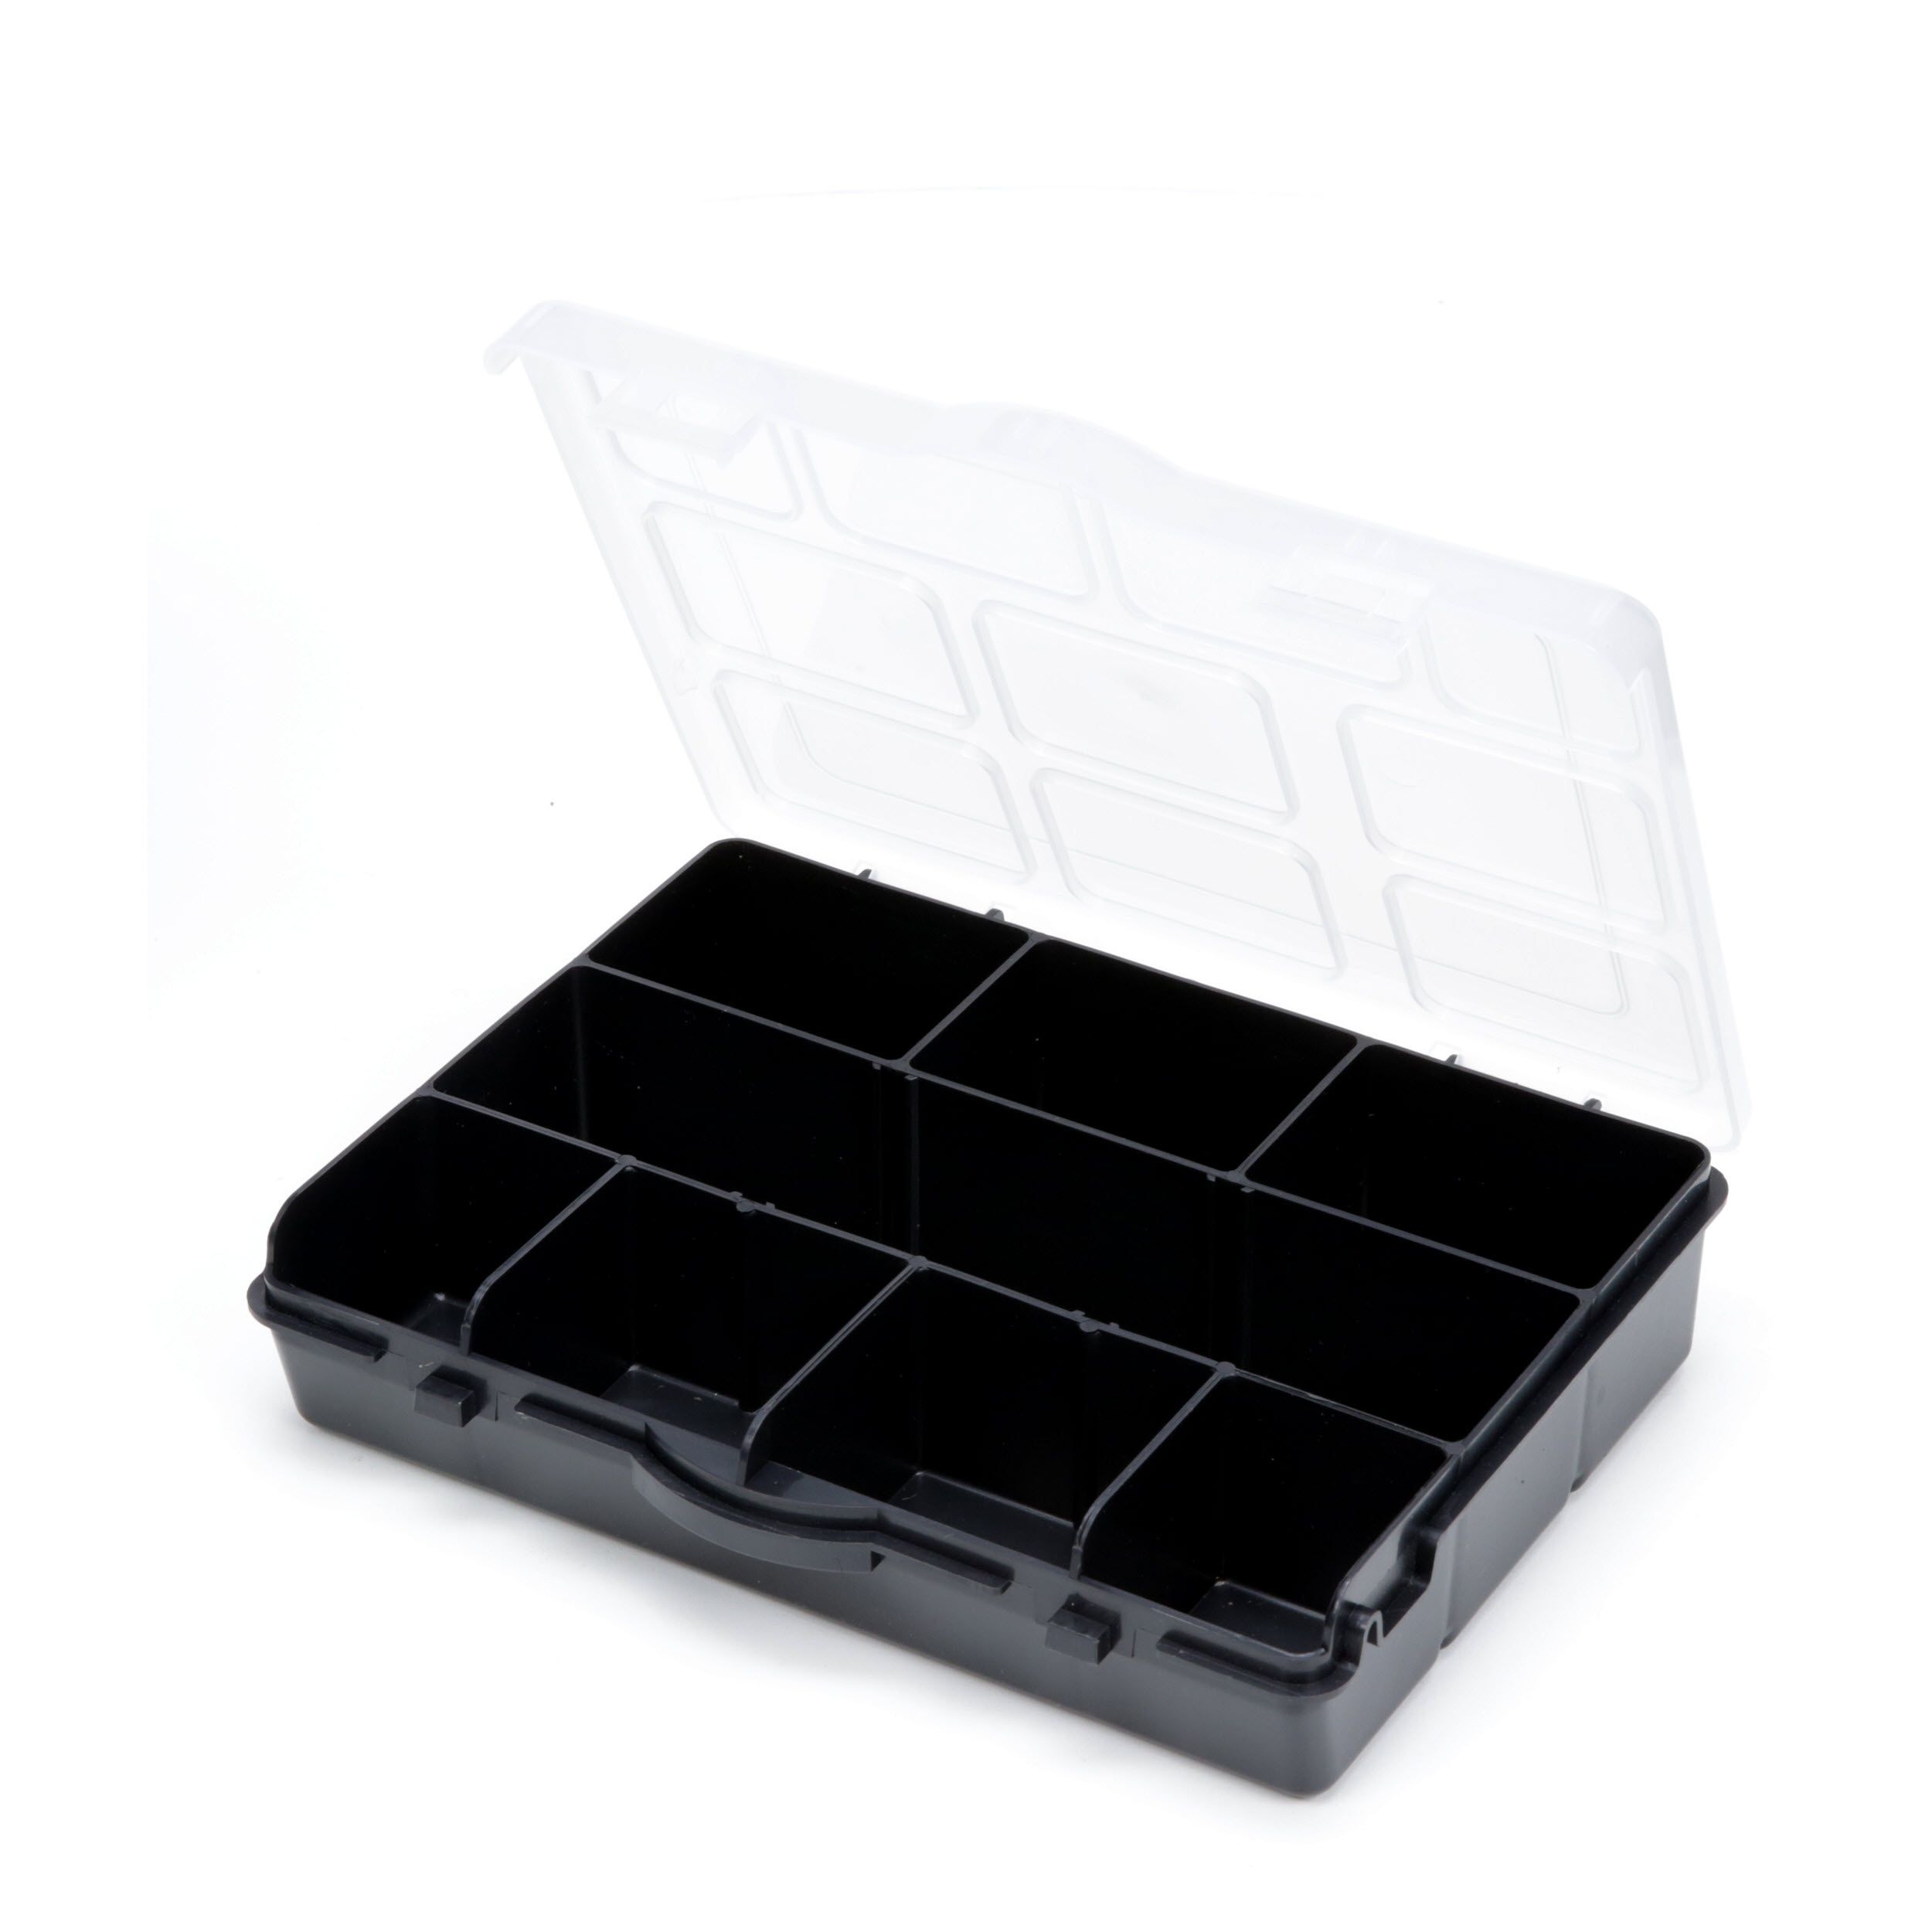 Durable Plastic Multi Compartments Tray Box Insert Light Weight -Black or White 